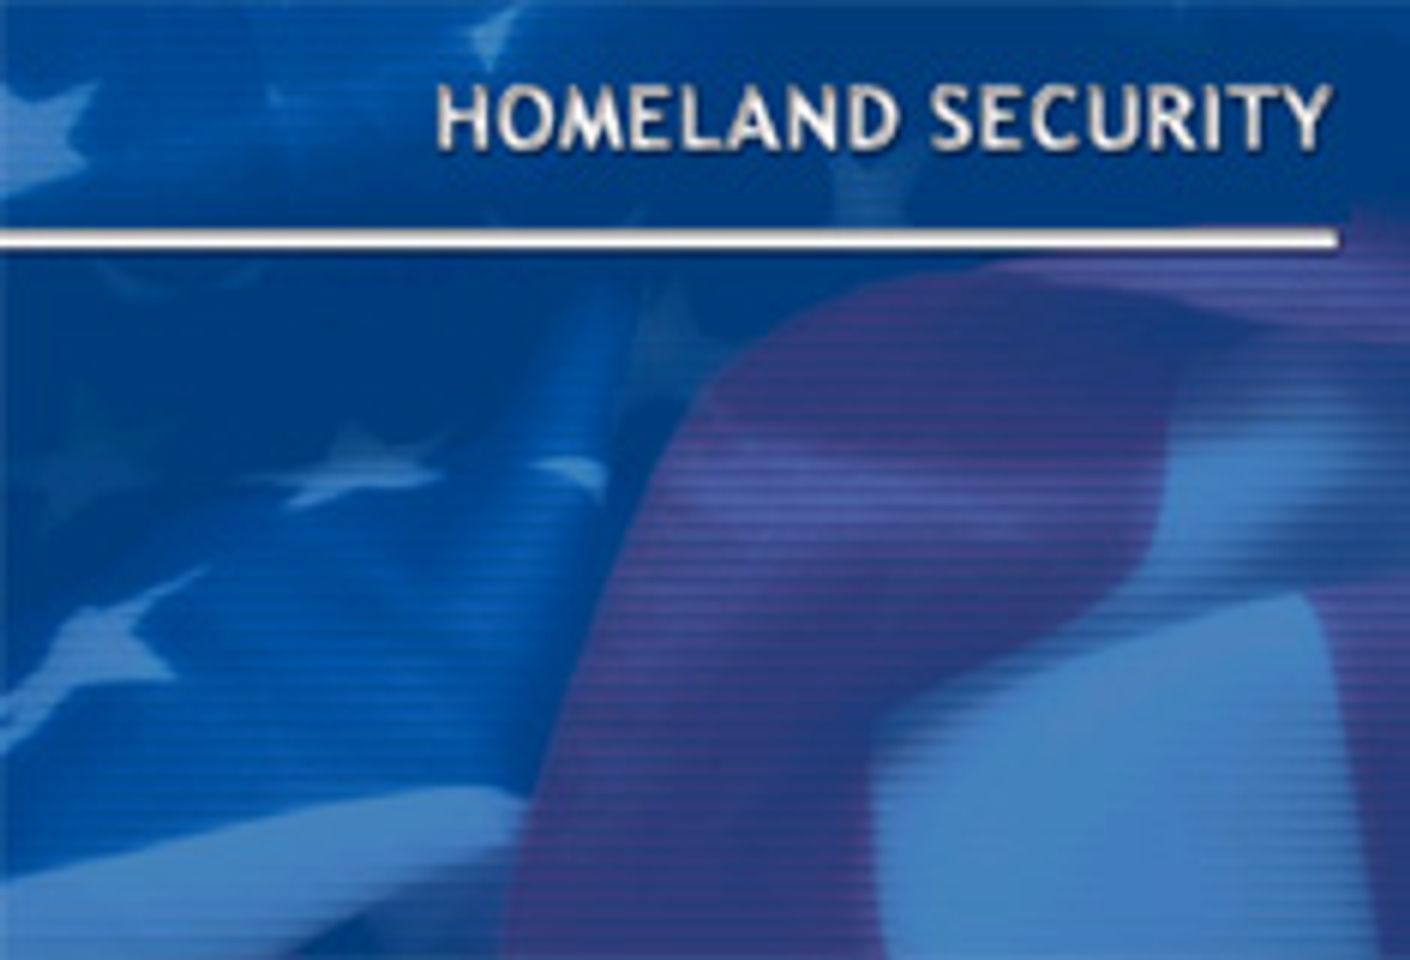 Homeland Security Bill Has Clause To "Undermine" E-Gambling